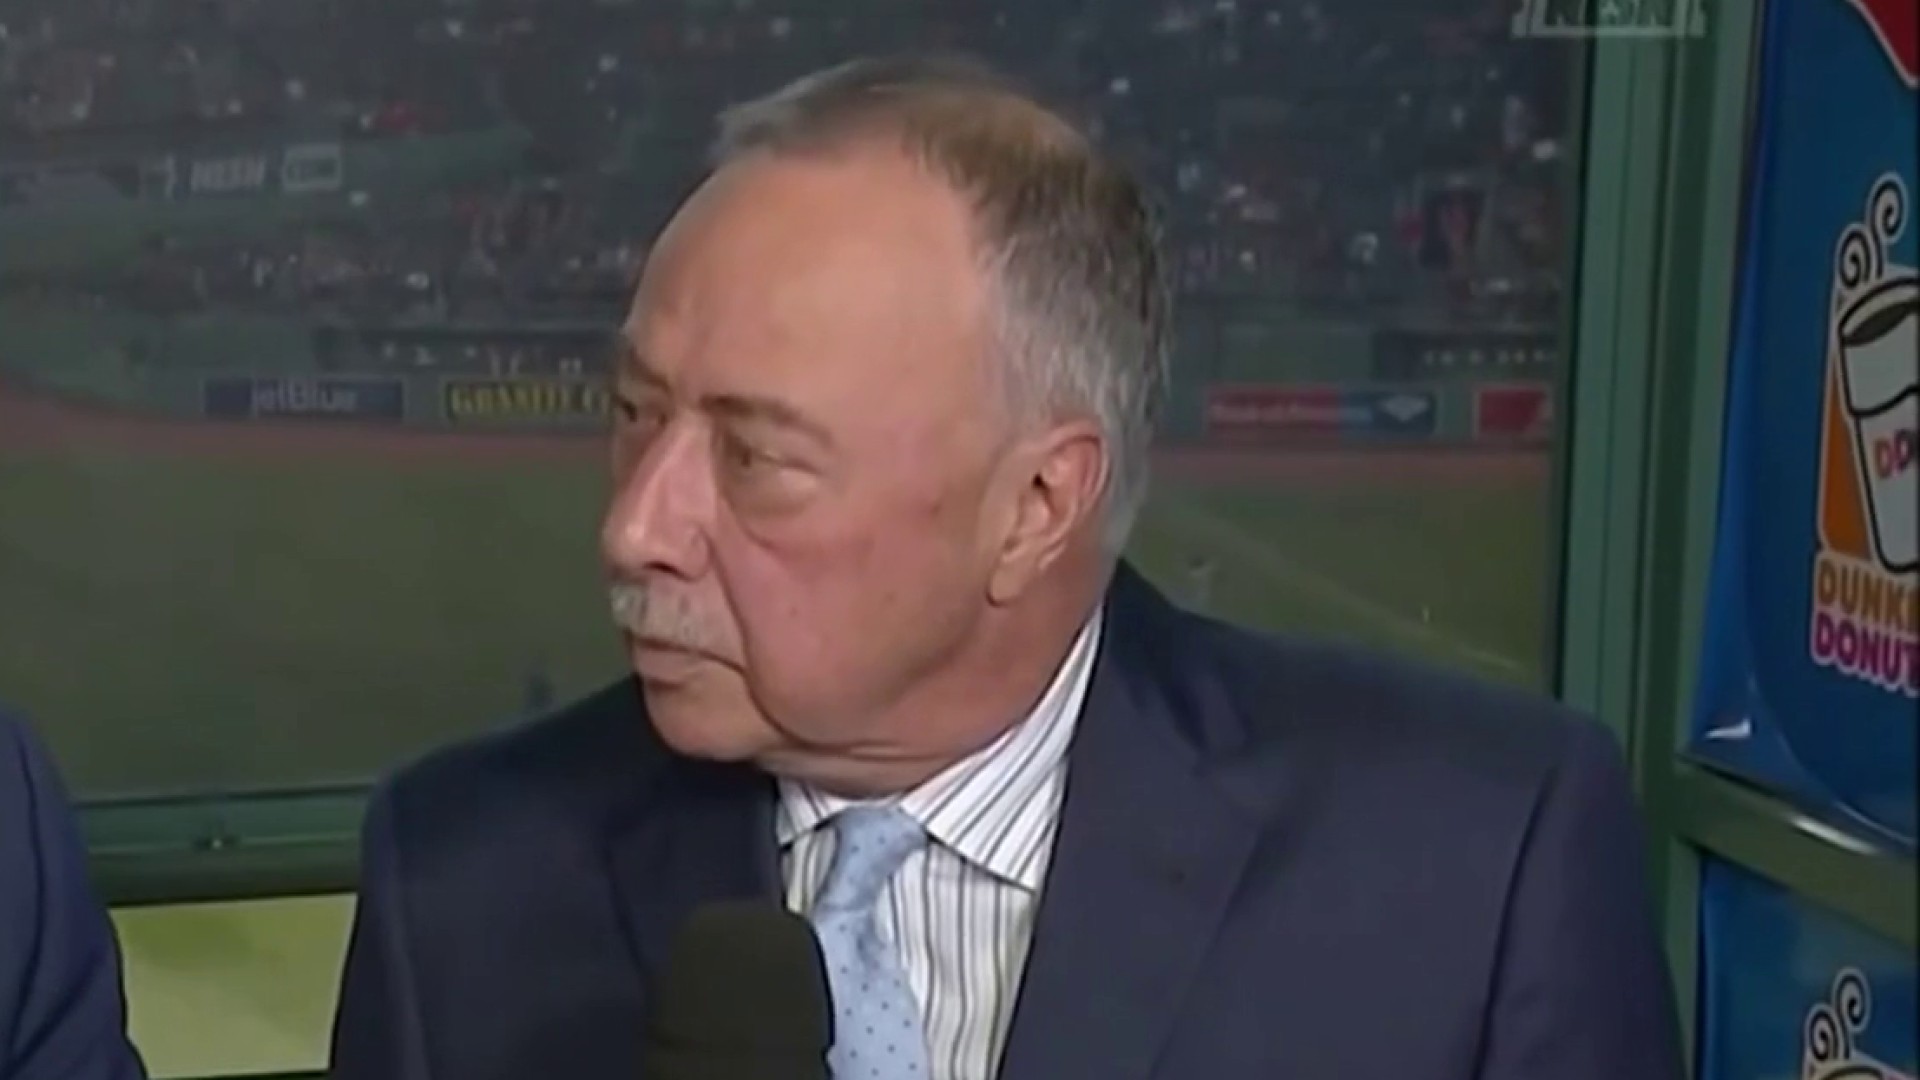 Jerry Remy, Boston Red Sox broadcaster, dies after long battle